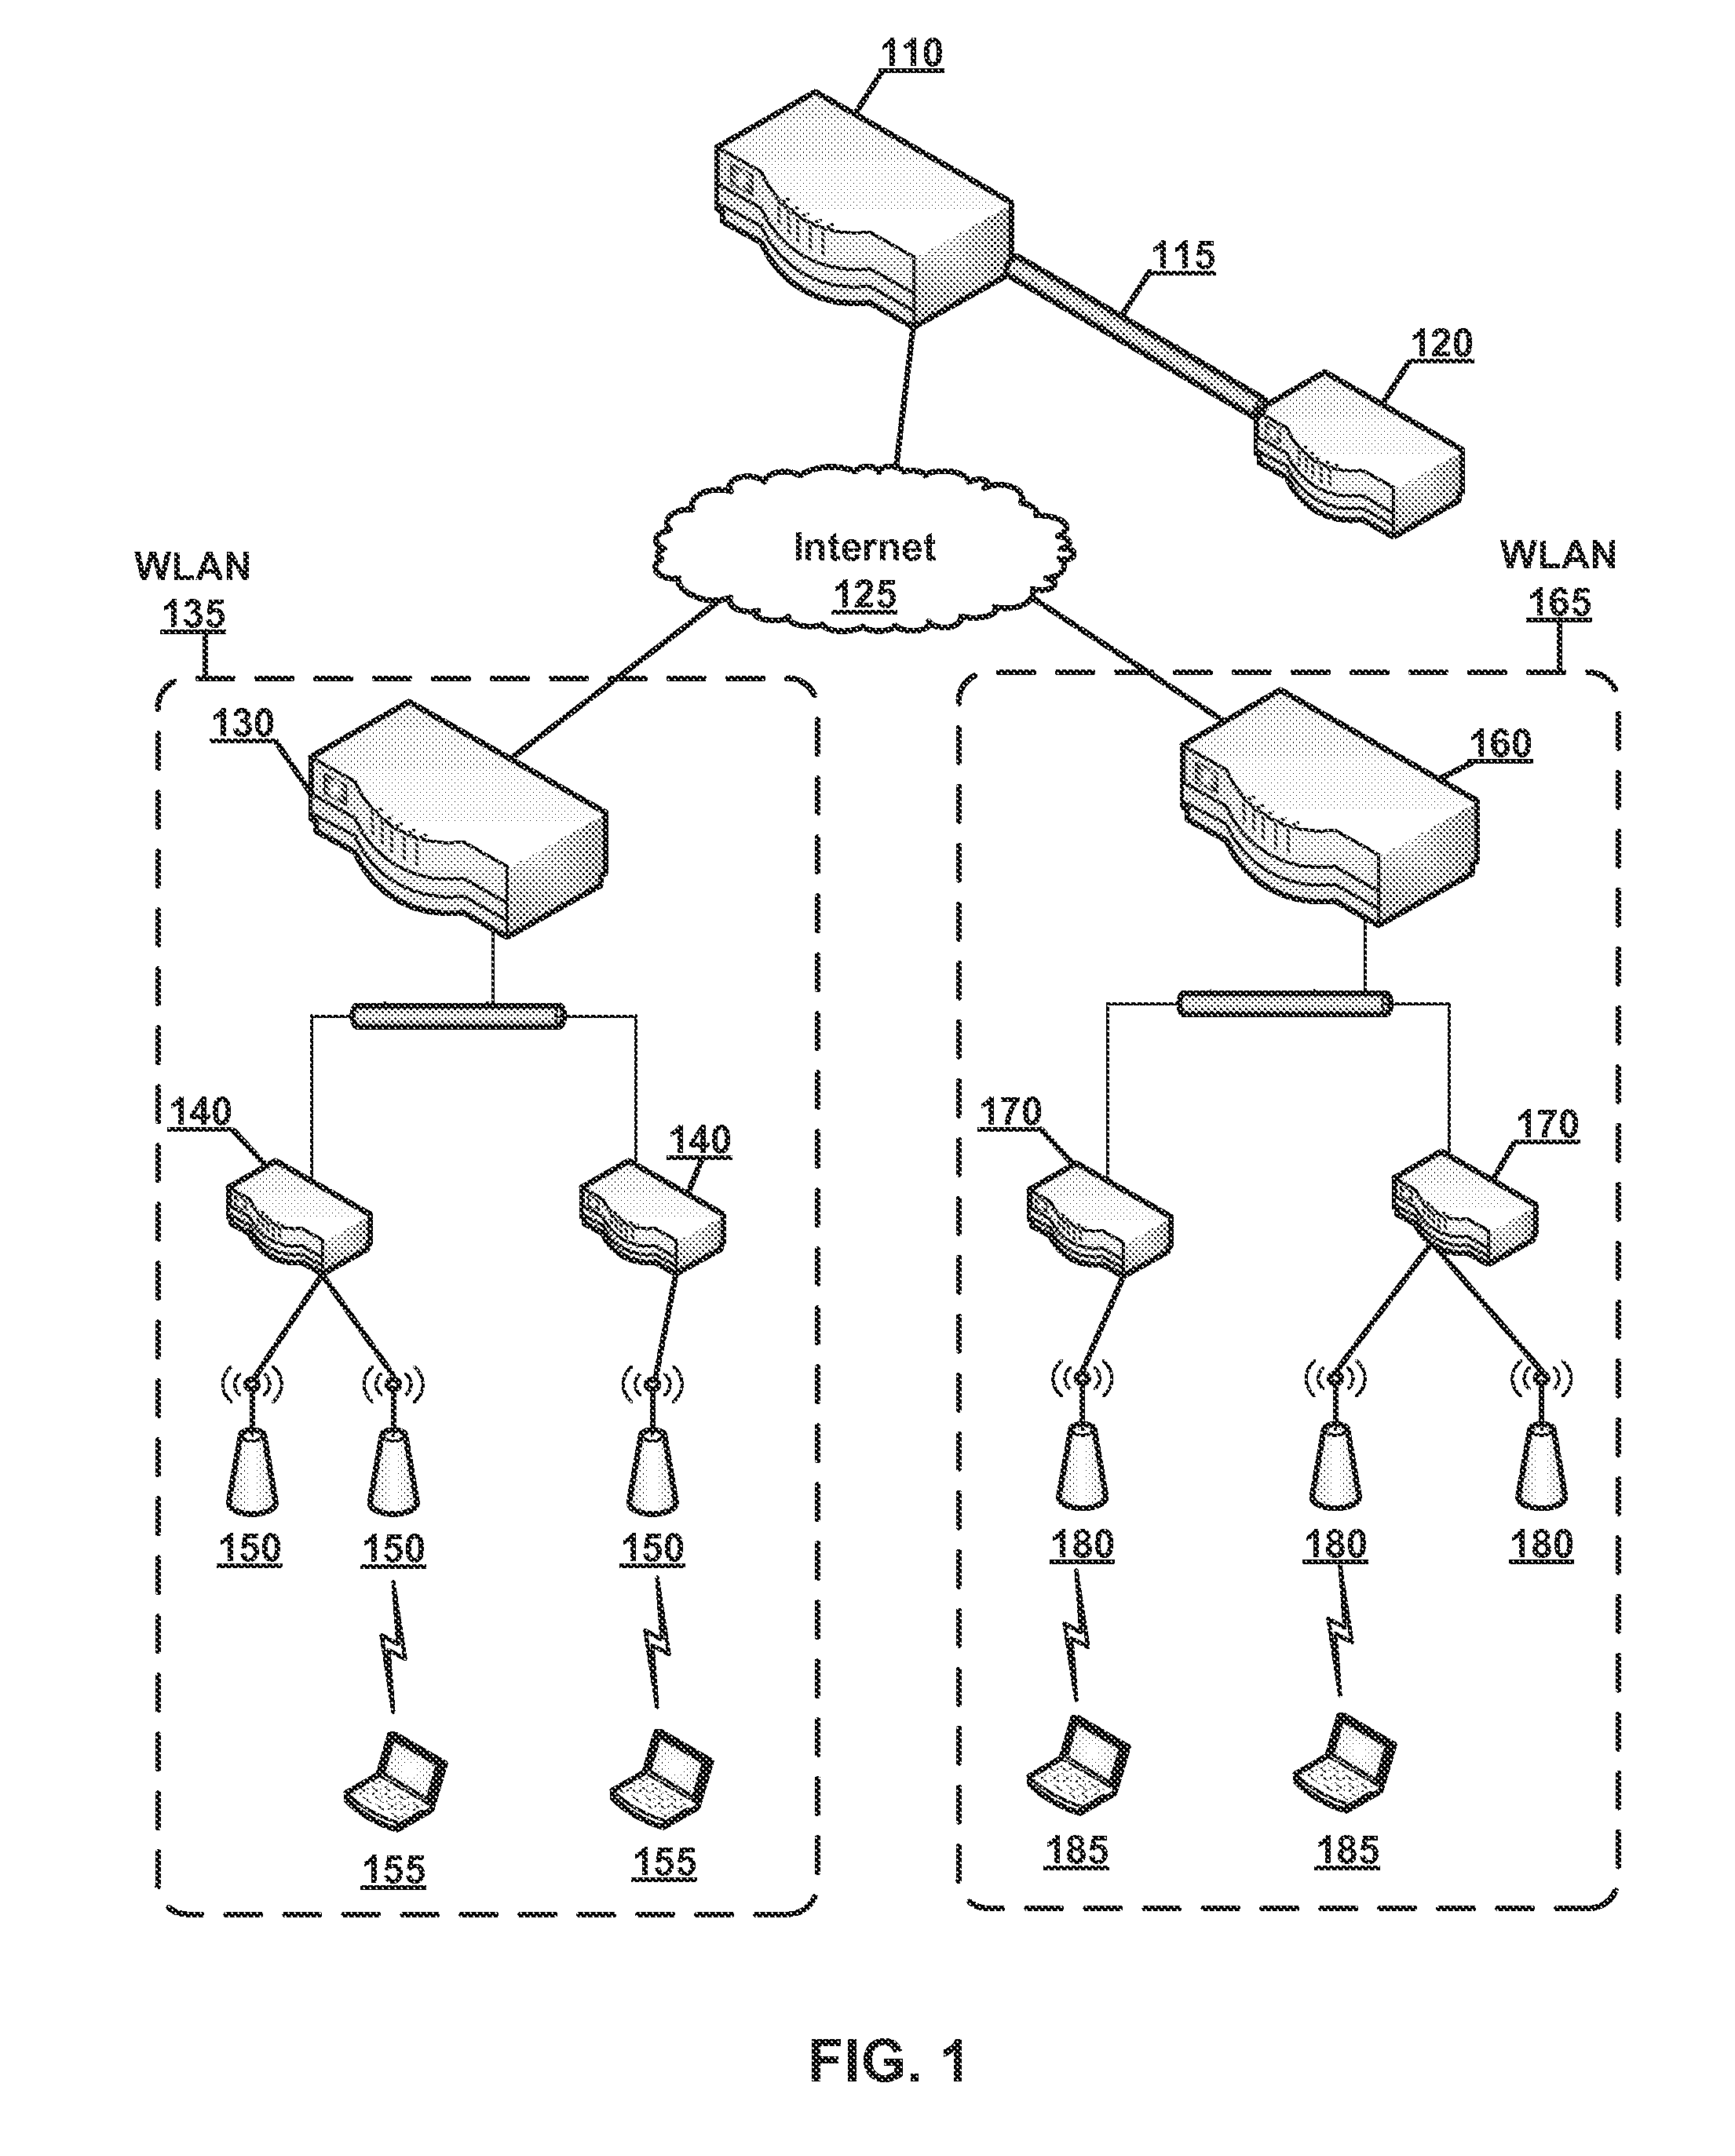 Centralized Configuration with Dynamic Distributed Address Management